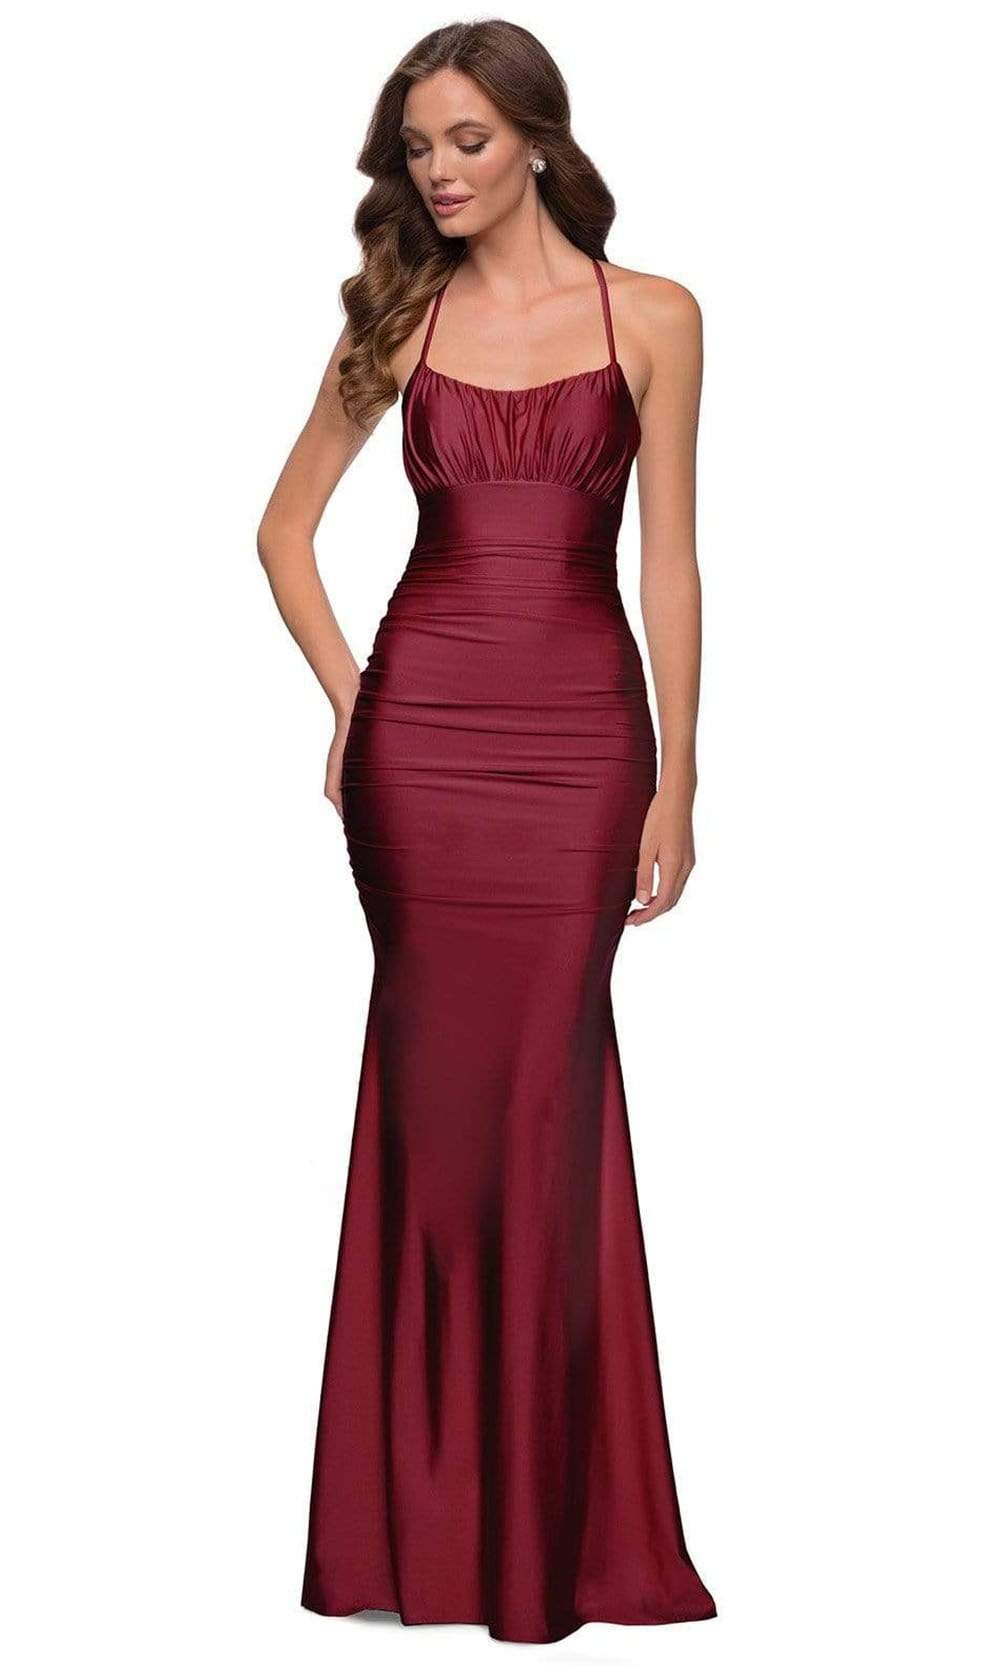 Image of La Femme - 29873 Open Back Jersey Modest Prom Gown